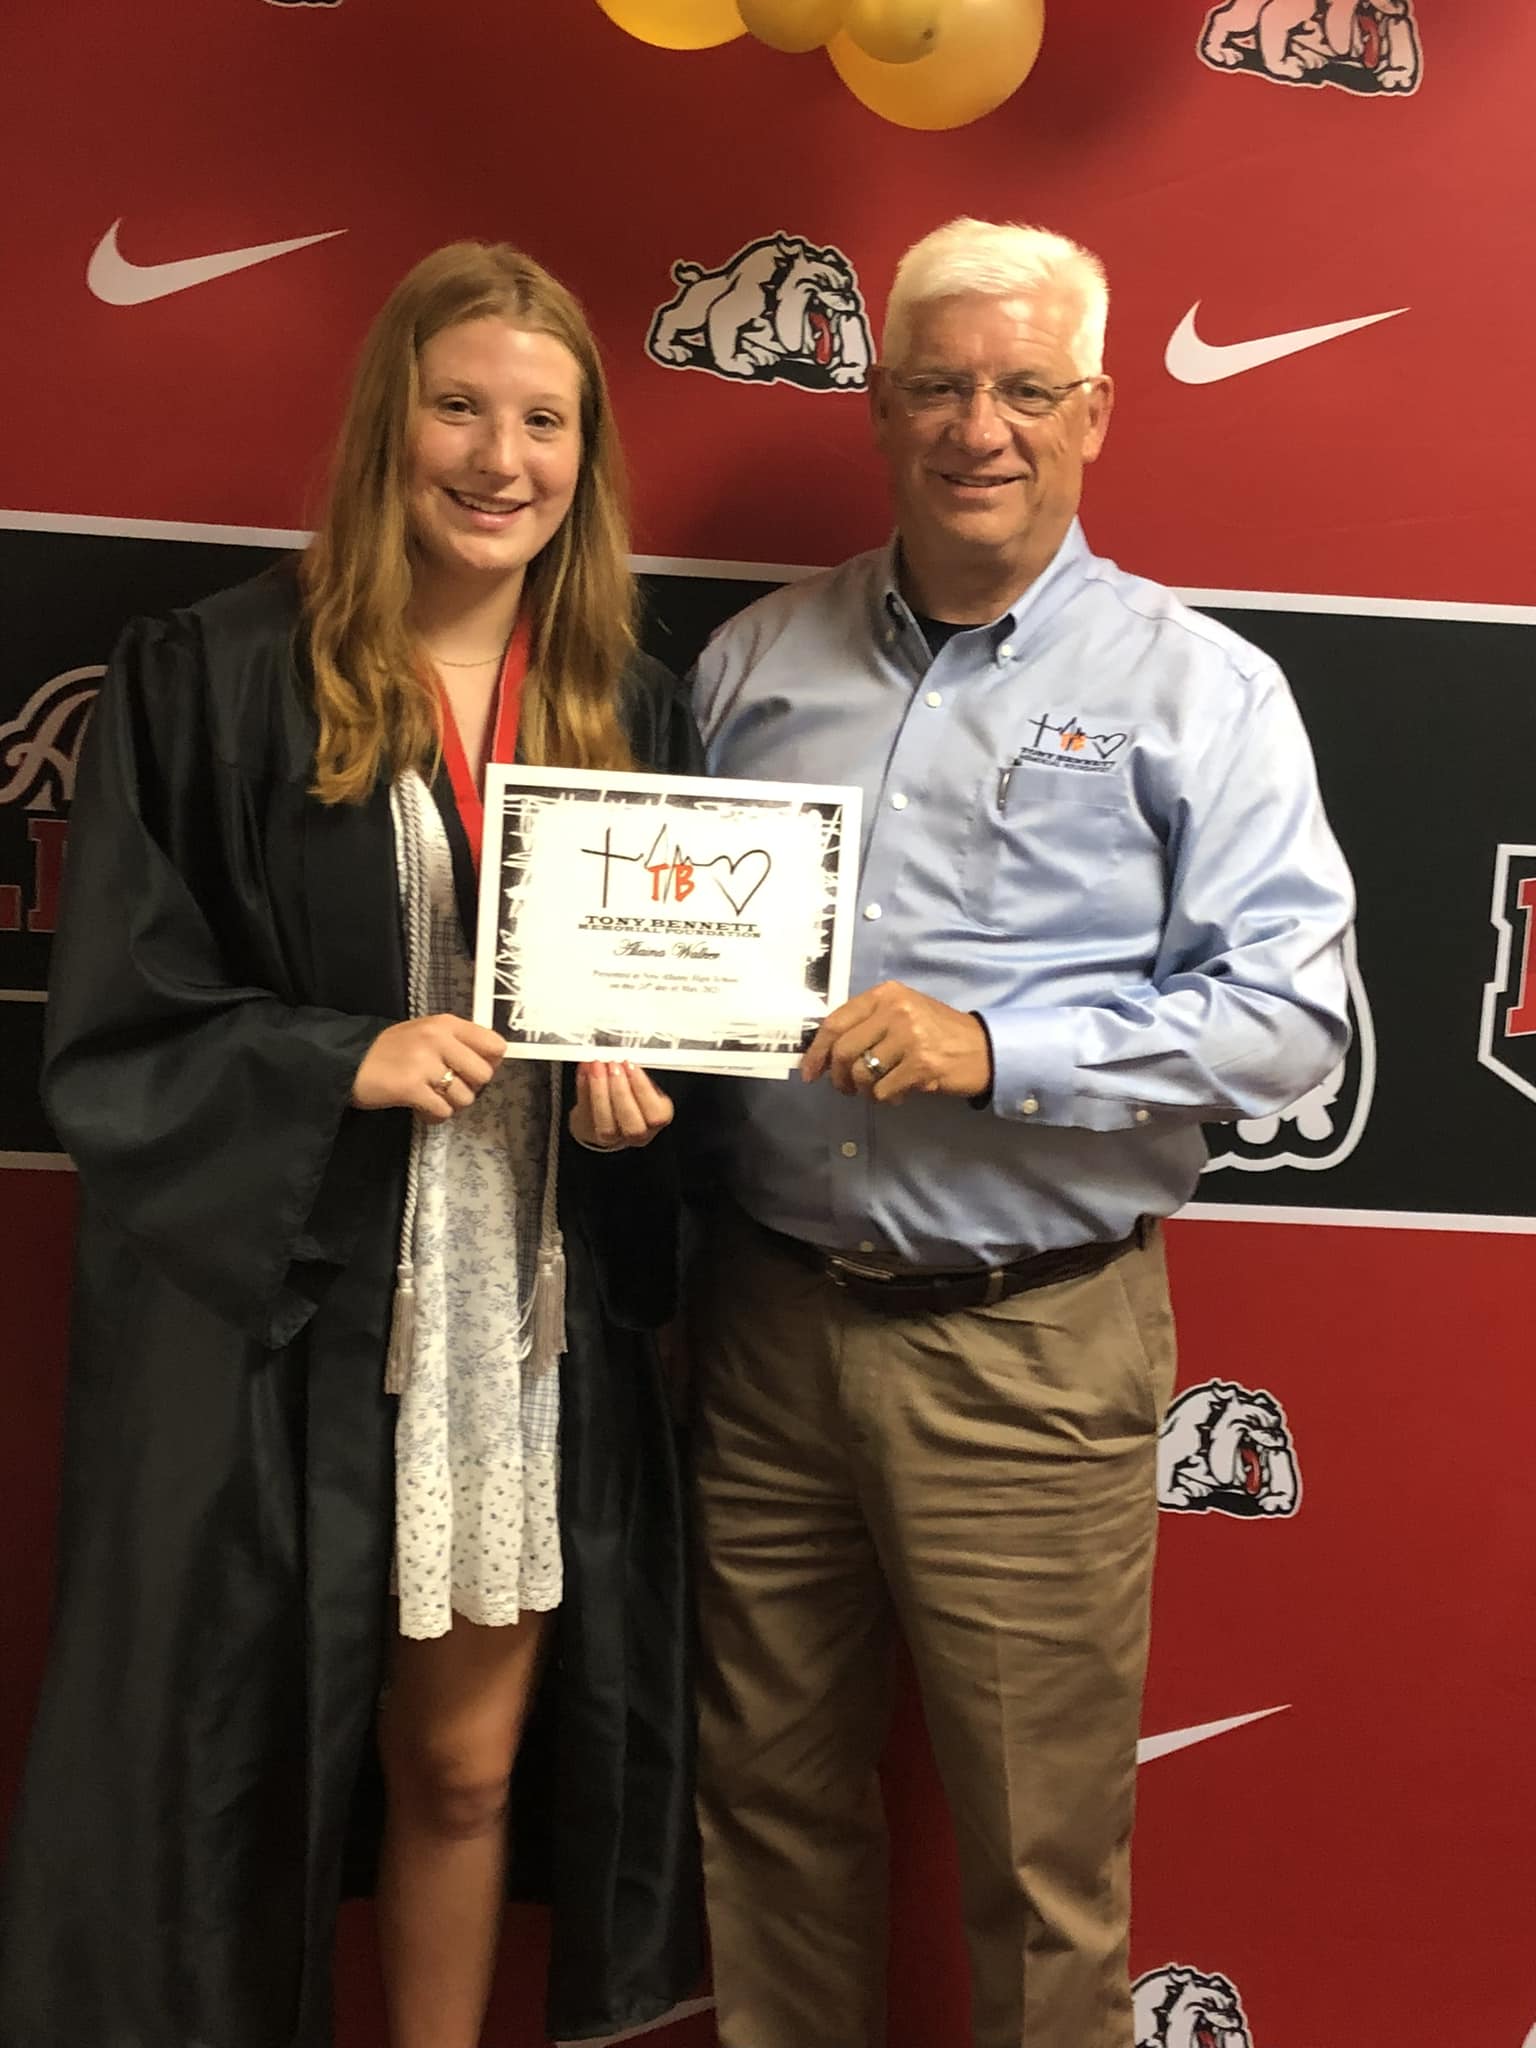 New Albany student accepting scholarship.